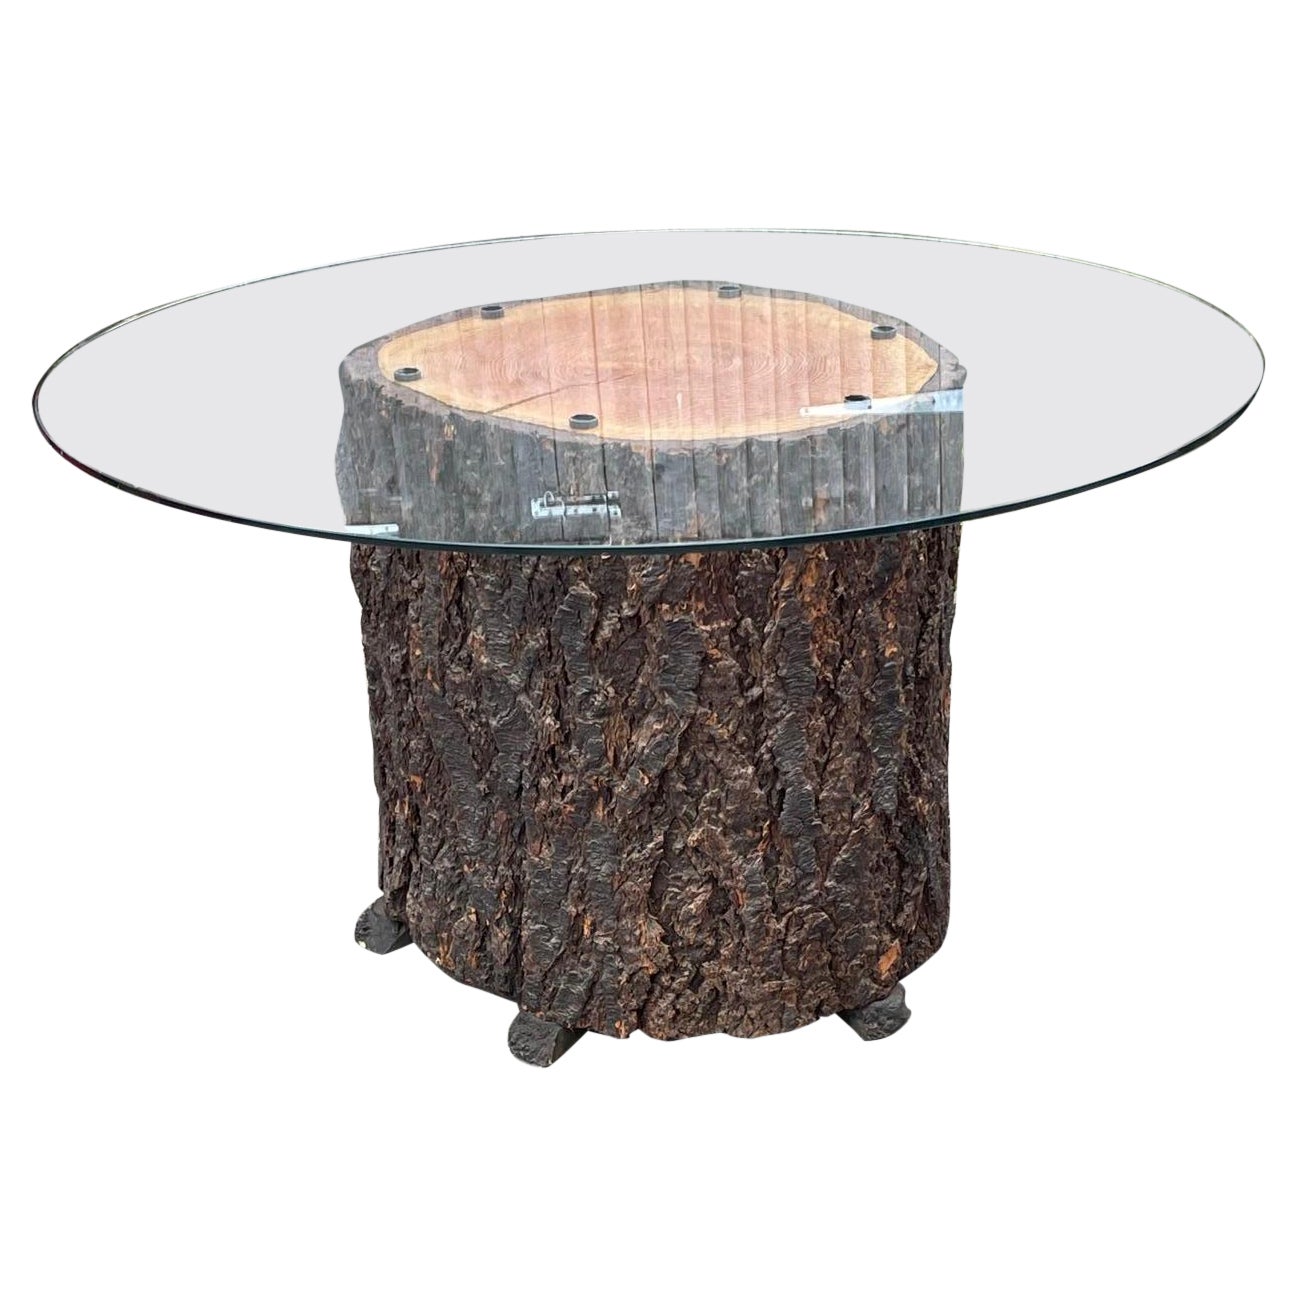 Bespoke Center Table Made with Douglas Fern, Bog Wood and a Glass Circular Top